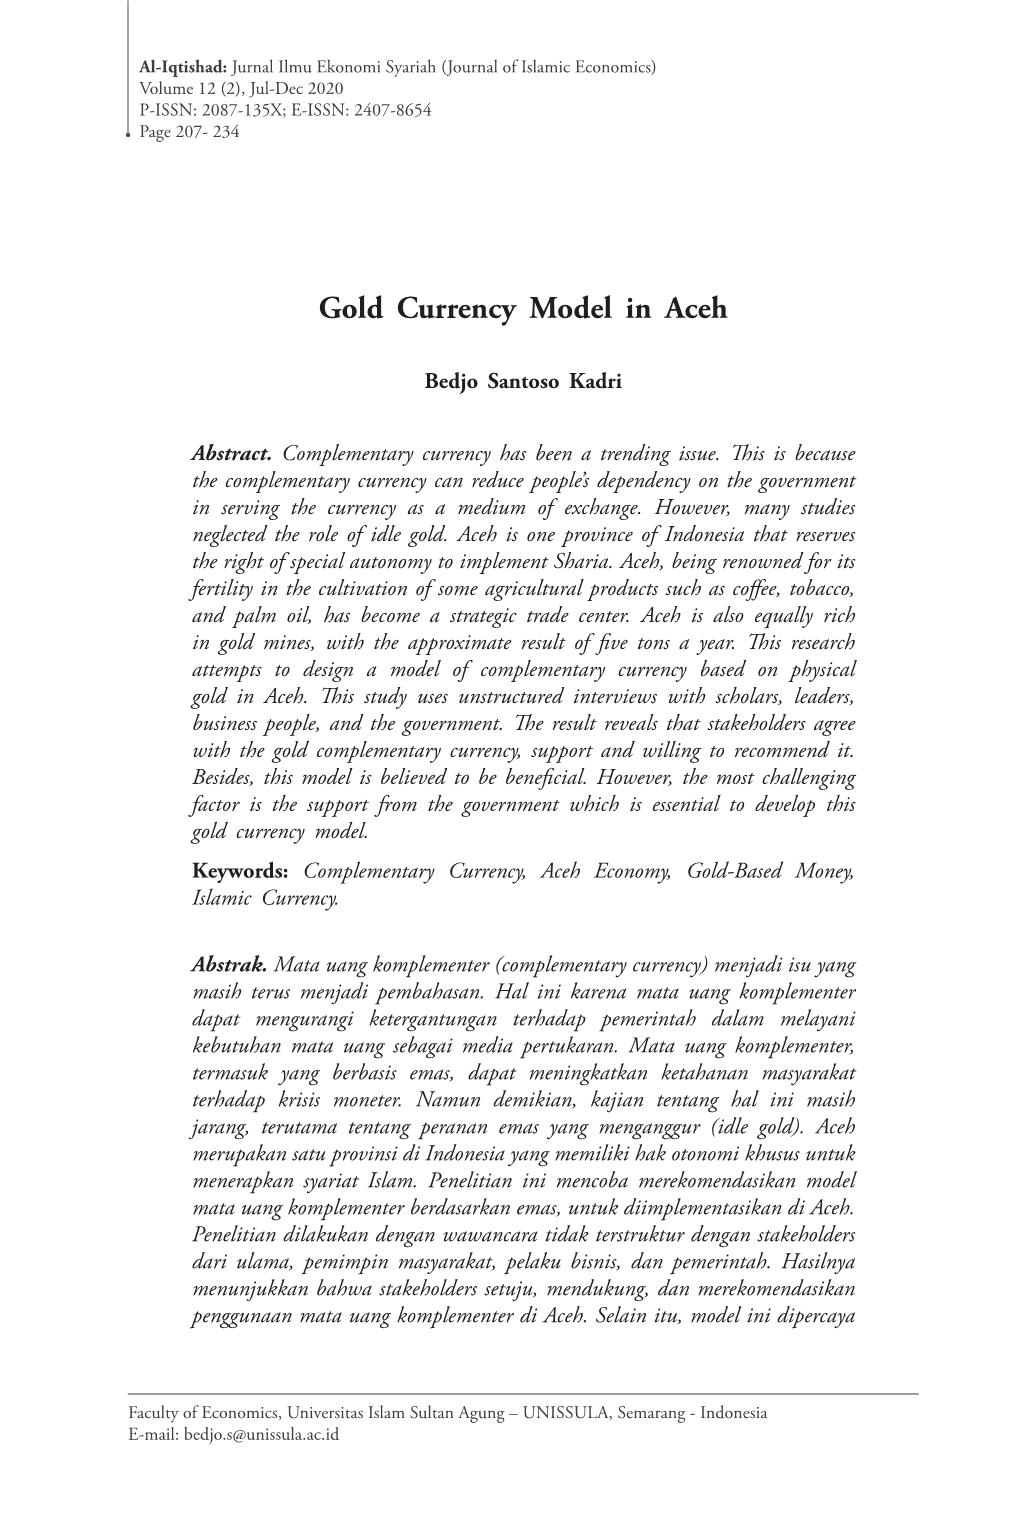 Gold Currency Model in Aceh